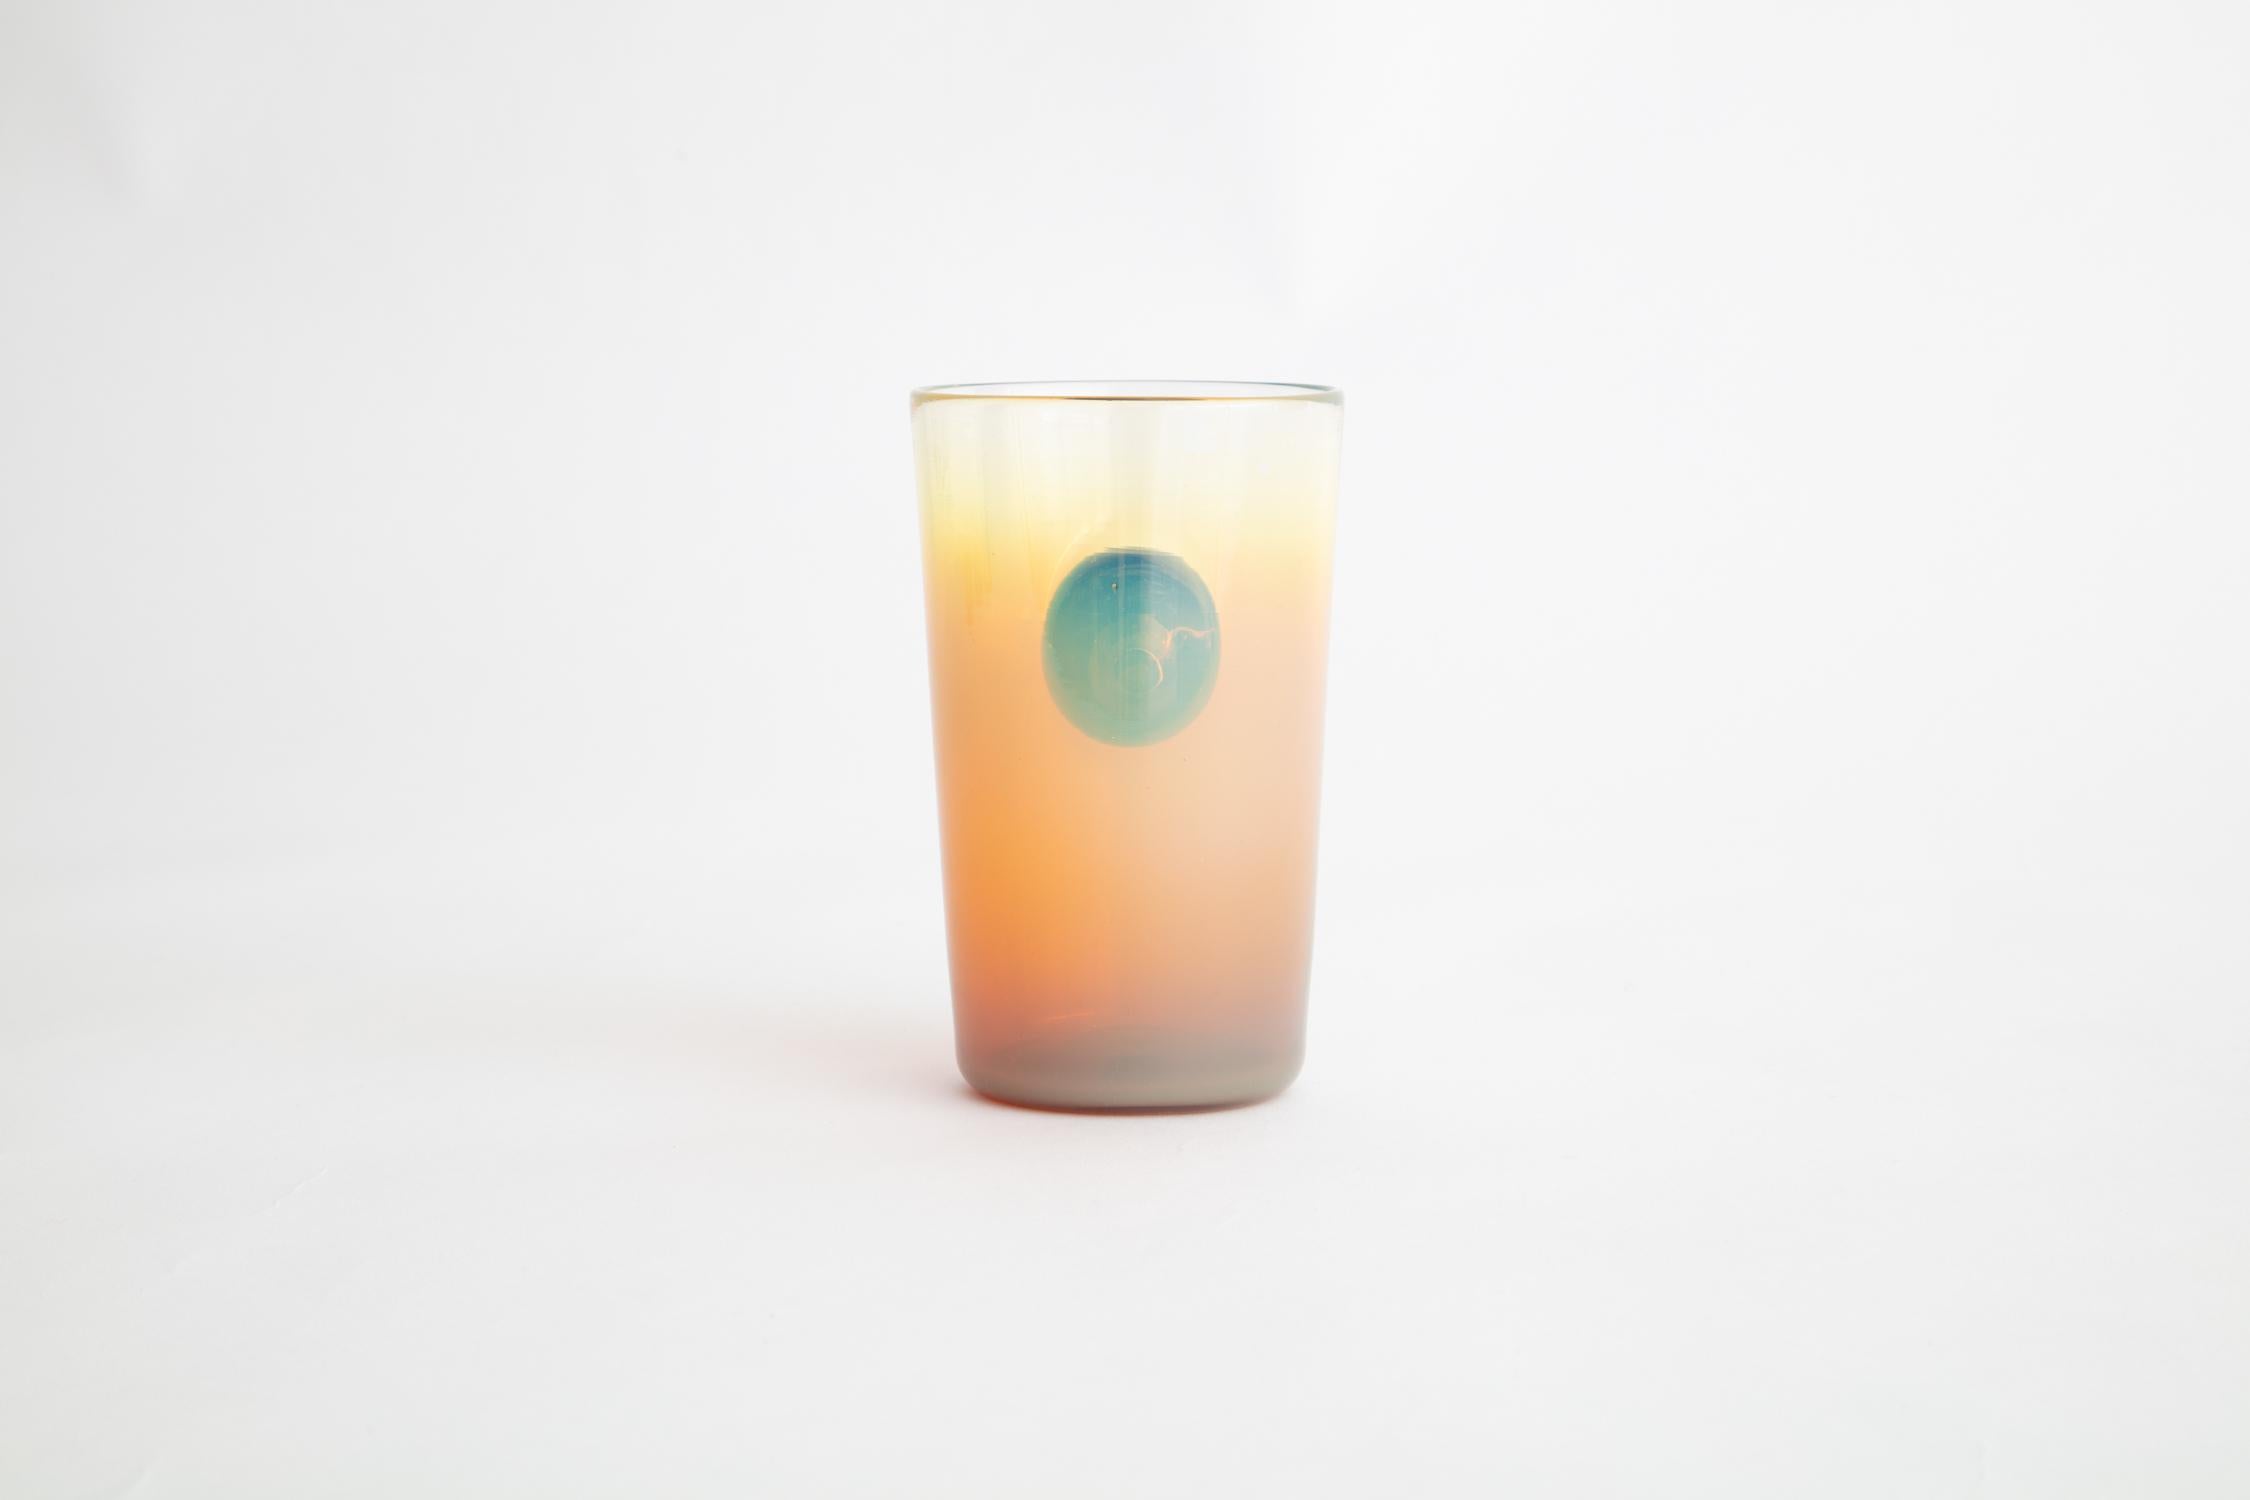 Surrealist-inspired sunrise sunset cups are hand blown in a kaleidoscope of ombre colors and adorned with contrasting orb handles to evoke a looking glass, a glimpse into a miniature universe.

Handmade by Jason Bauer and Romina Gonzales
Materials: